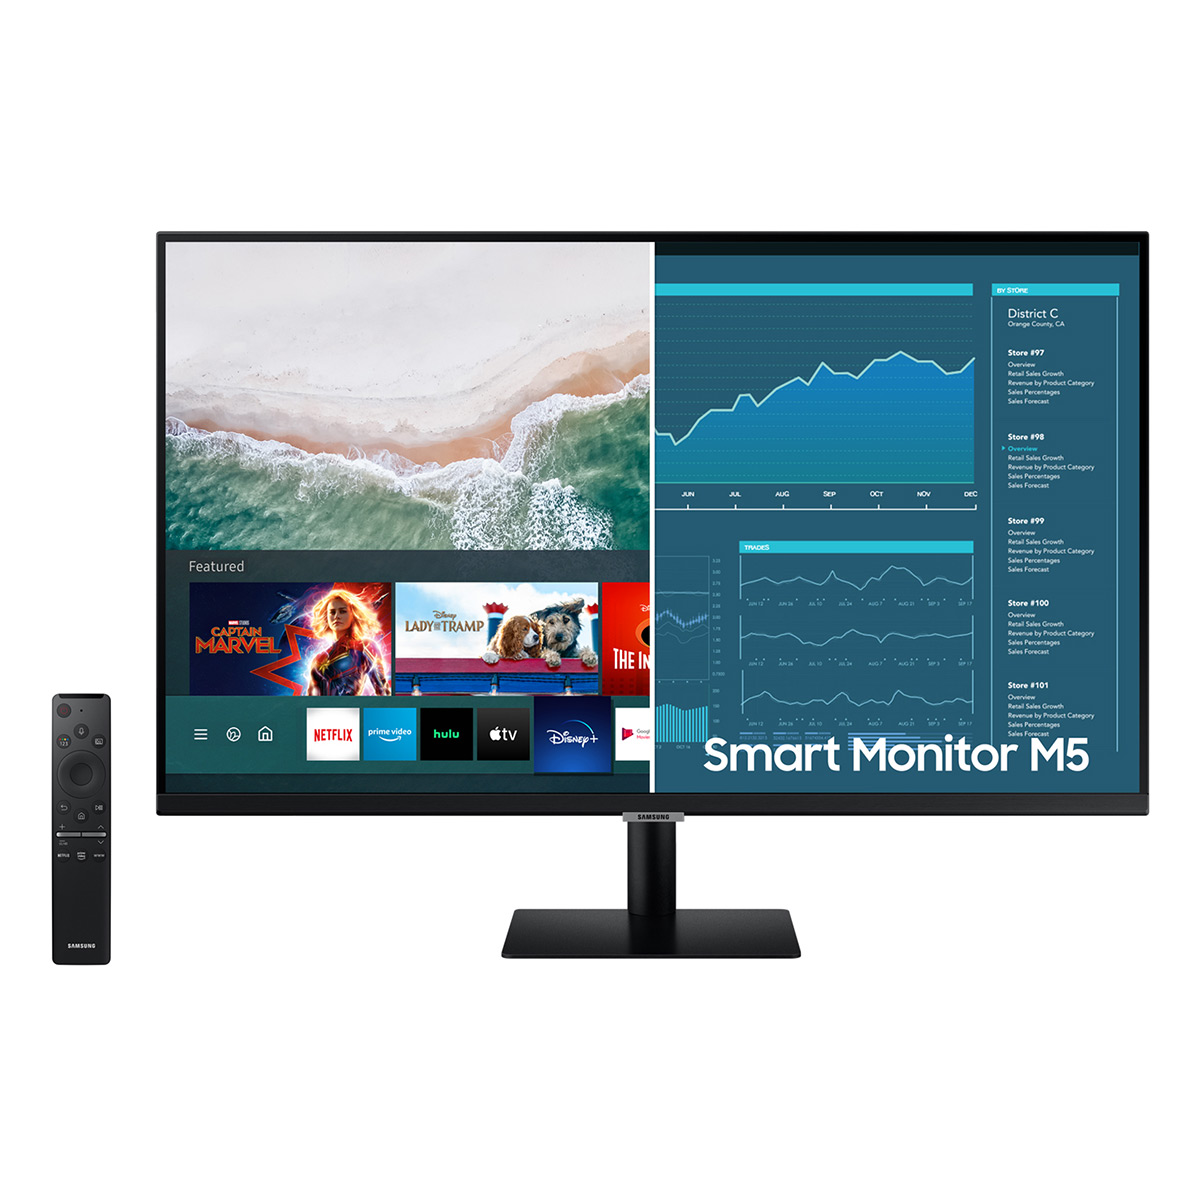 SAMSUNG 32" M5 LED Smart Monitor and Streaming TV, FHD, Remote Access, Microsoft 365 (1,920 x 1,080) - LS32AM500NNXZA - image 1 of 12